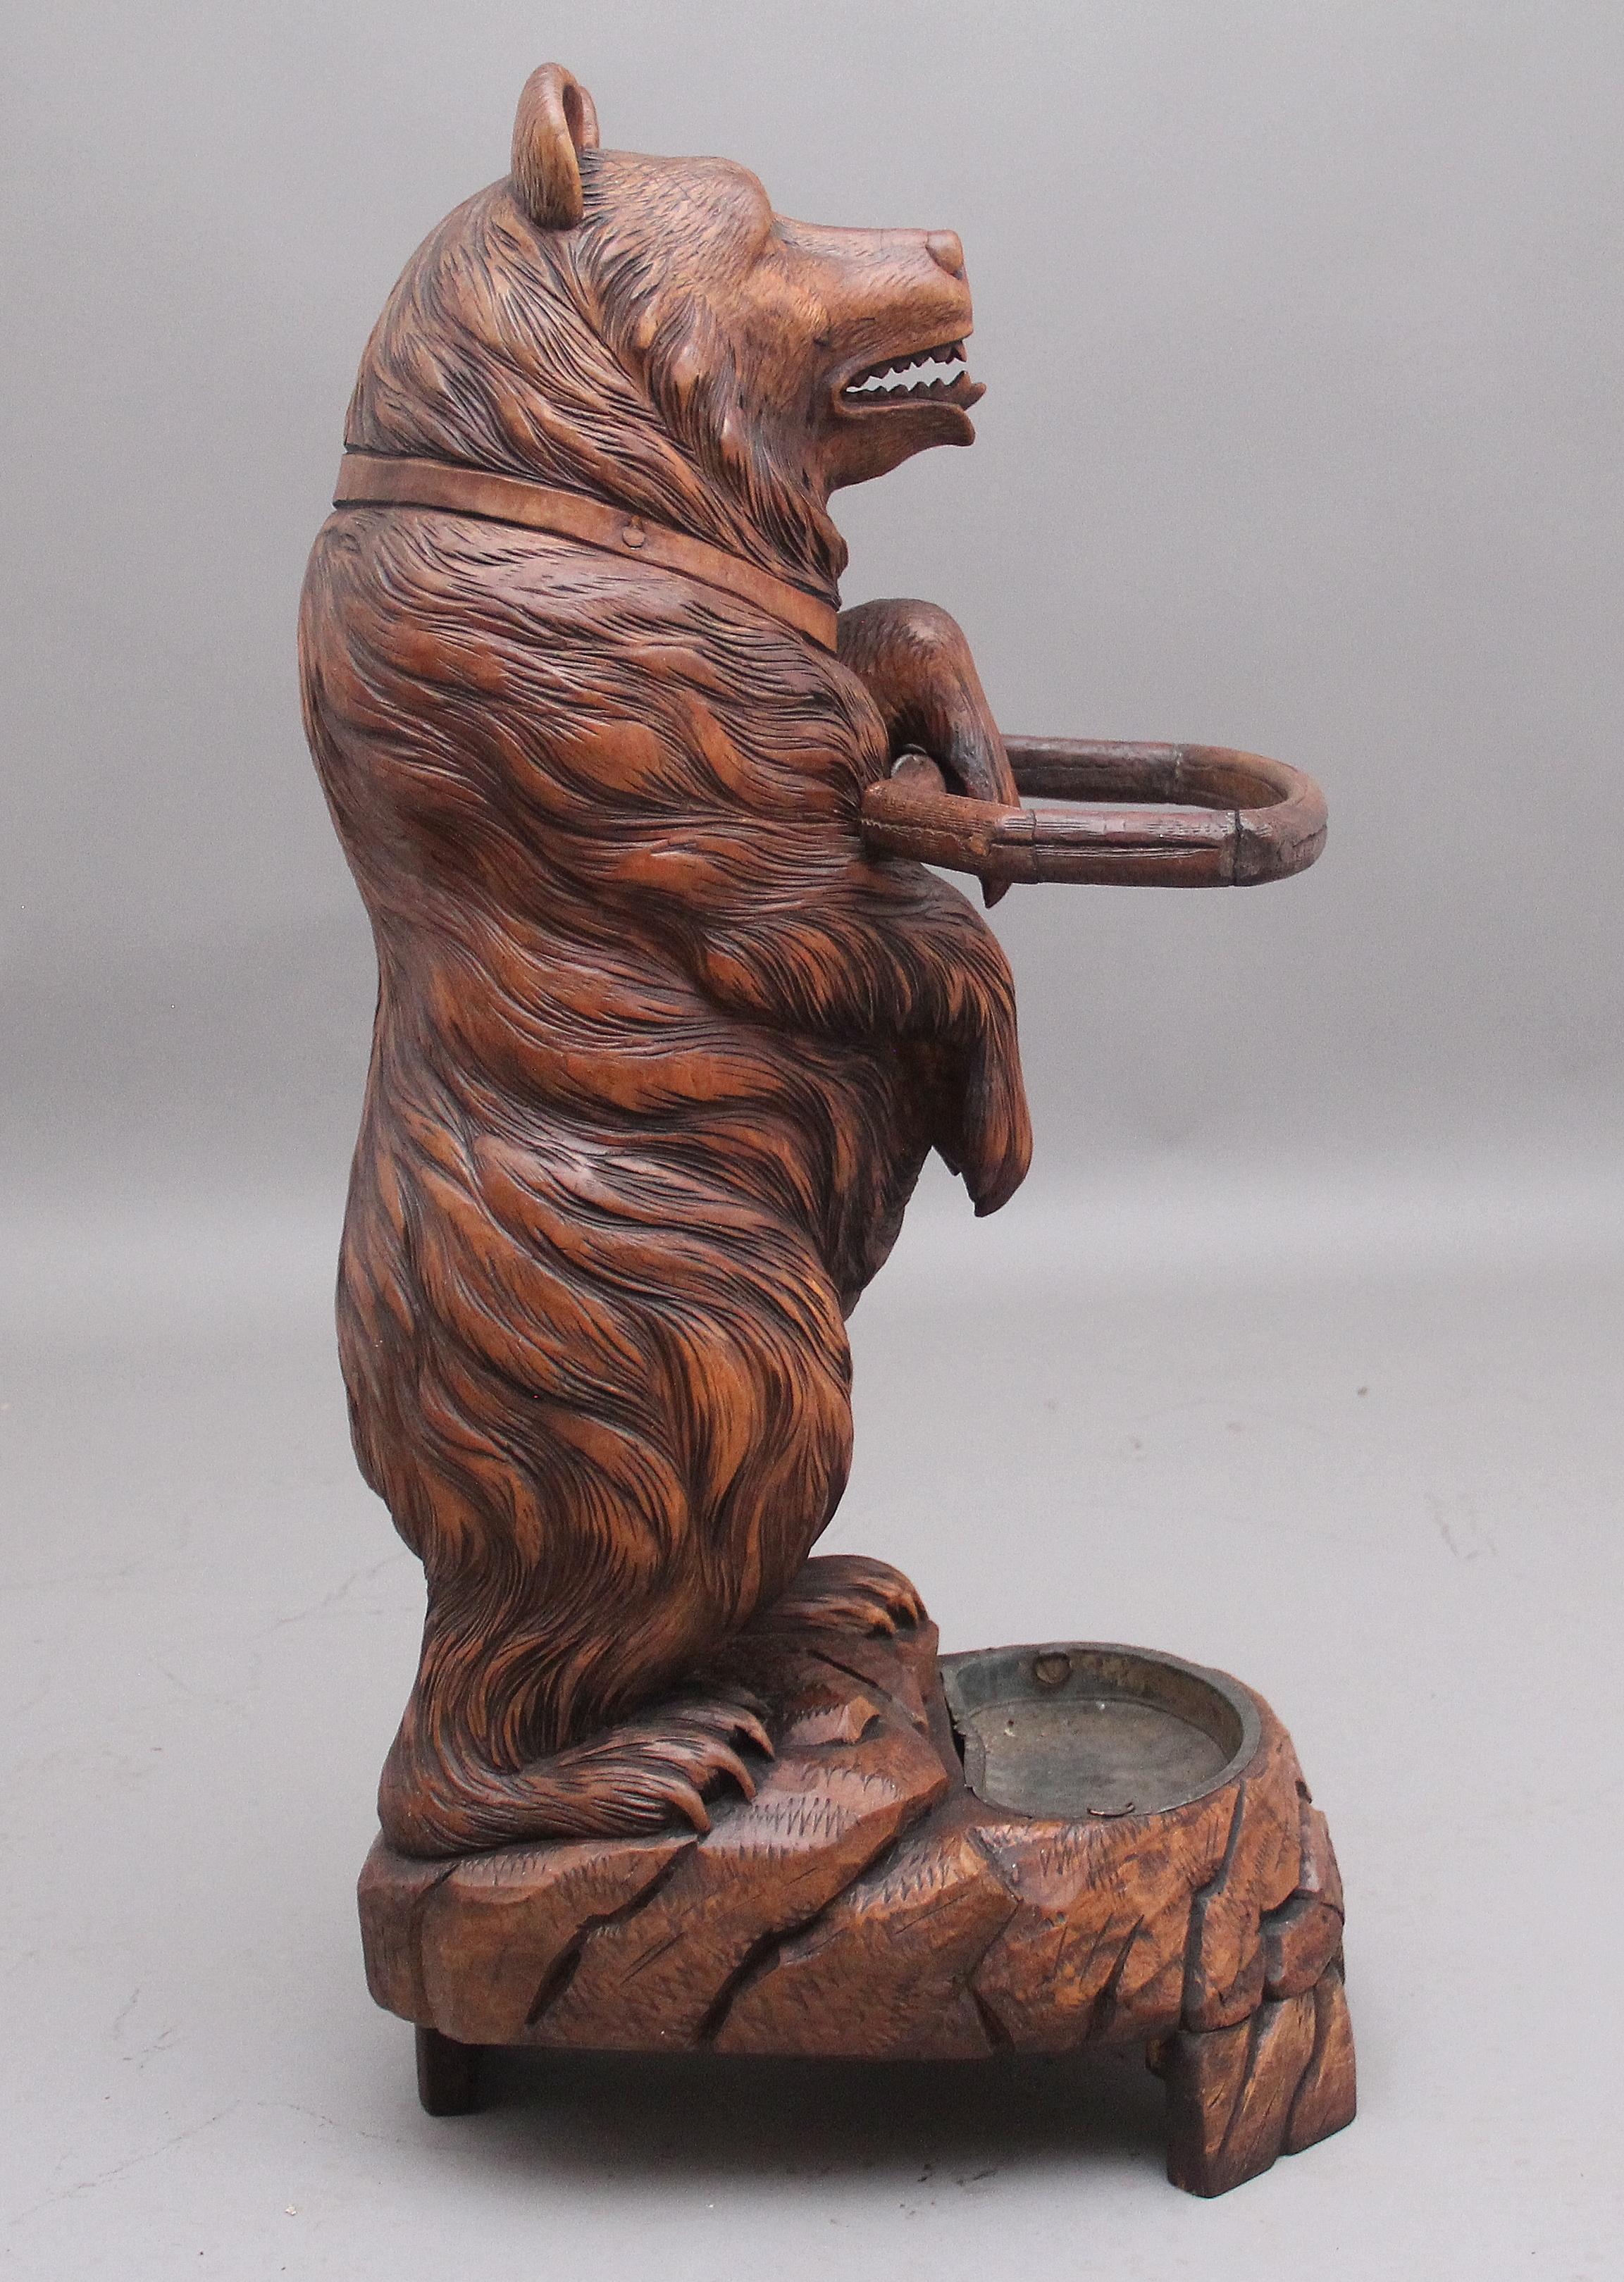 19th century black forest bear stick/umbrella stand constructed in linden wood, the stand consisting of a bear standing on his back legs with a front paw extended, with a naturalistic rockwork base inset with a drip pan, lovely quality carving and